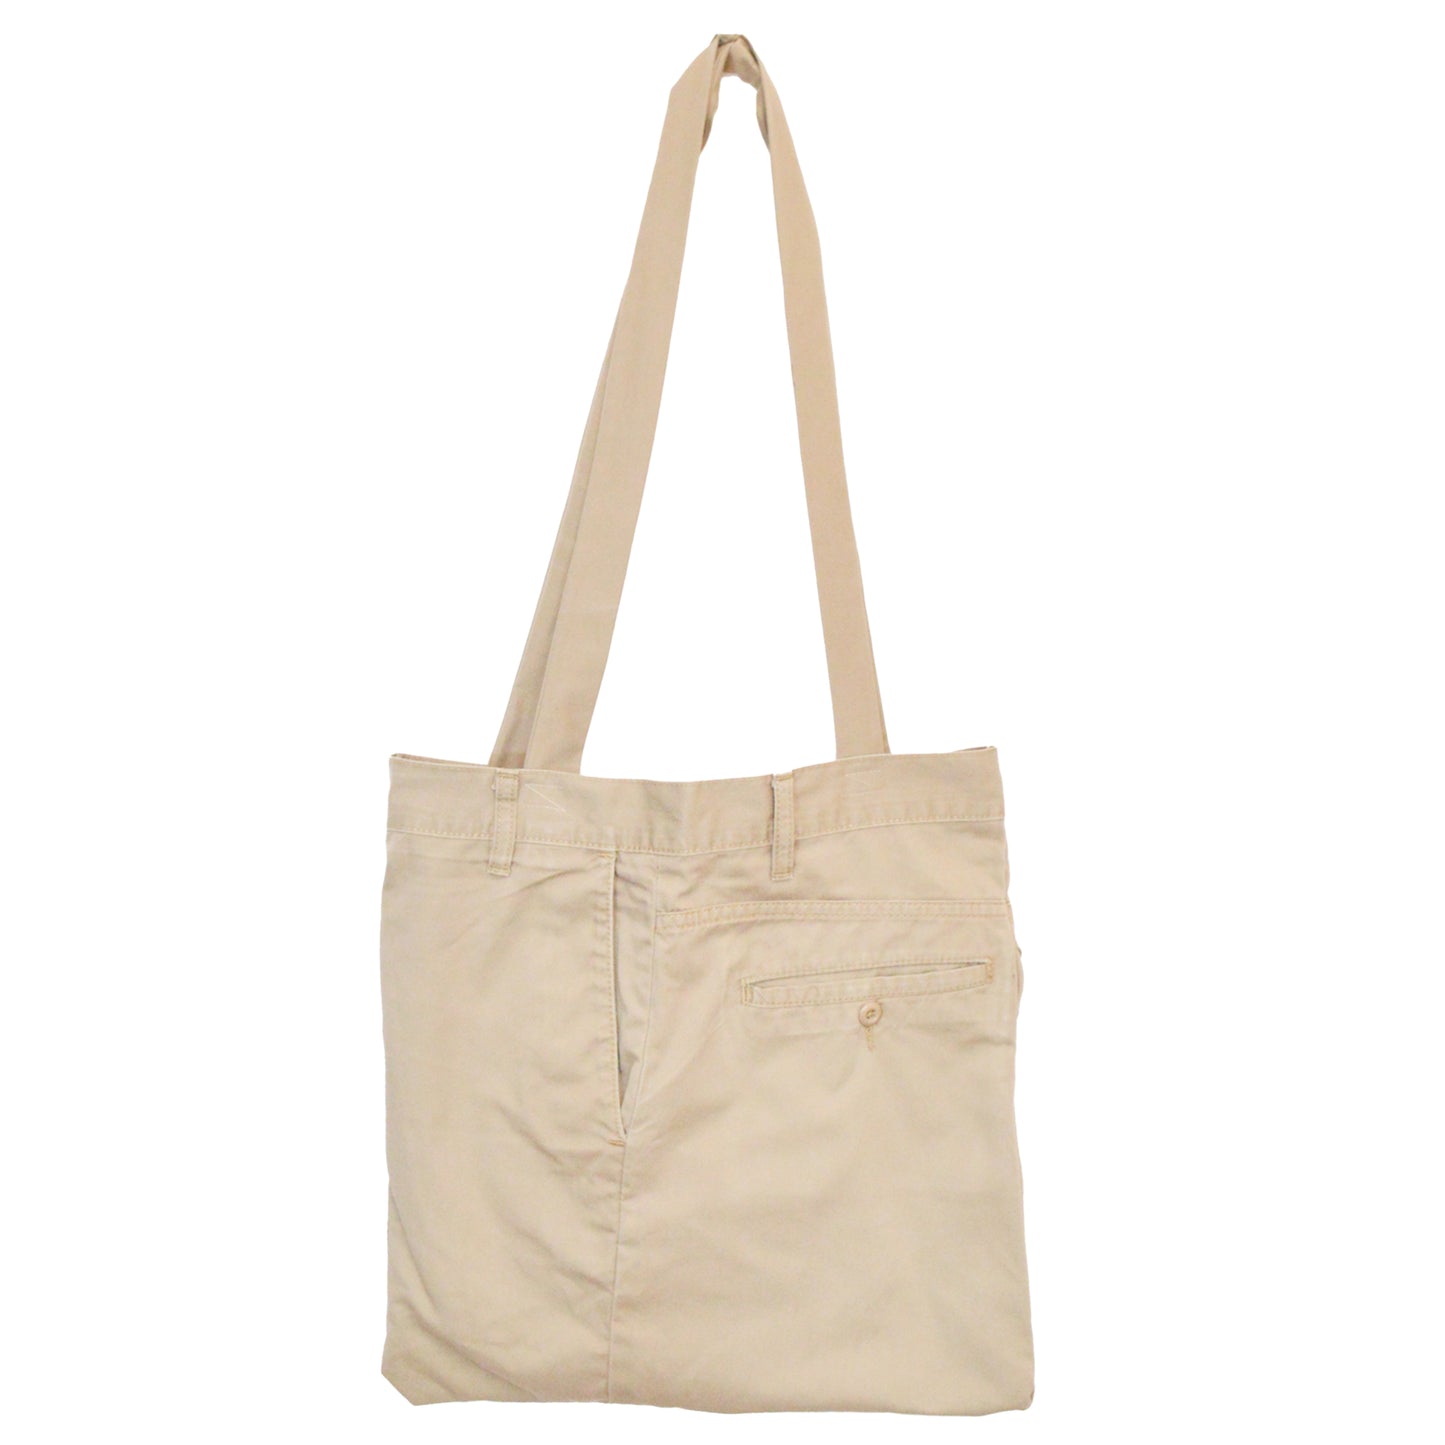 CARHARTT UPCYCLED TOTE BAG